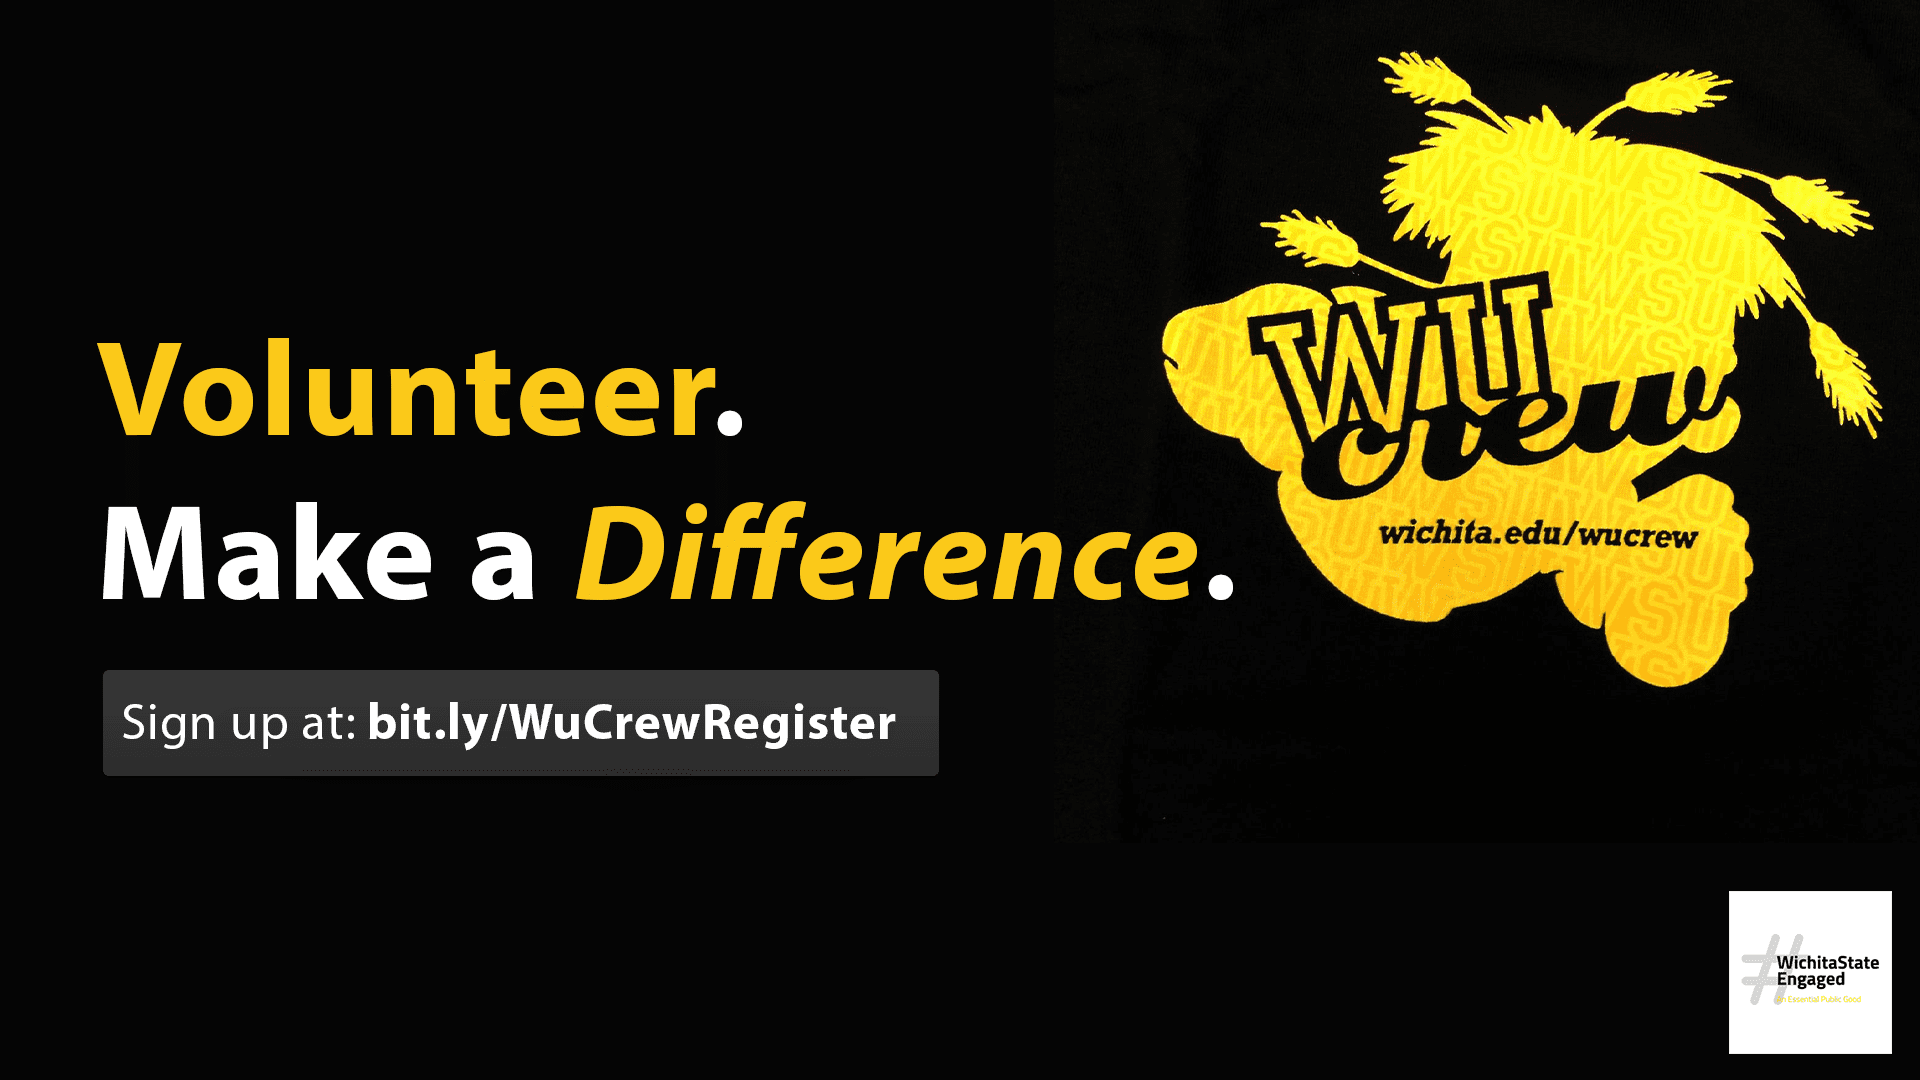 Volunteer to make a difference